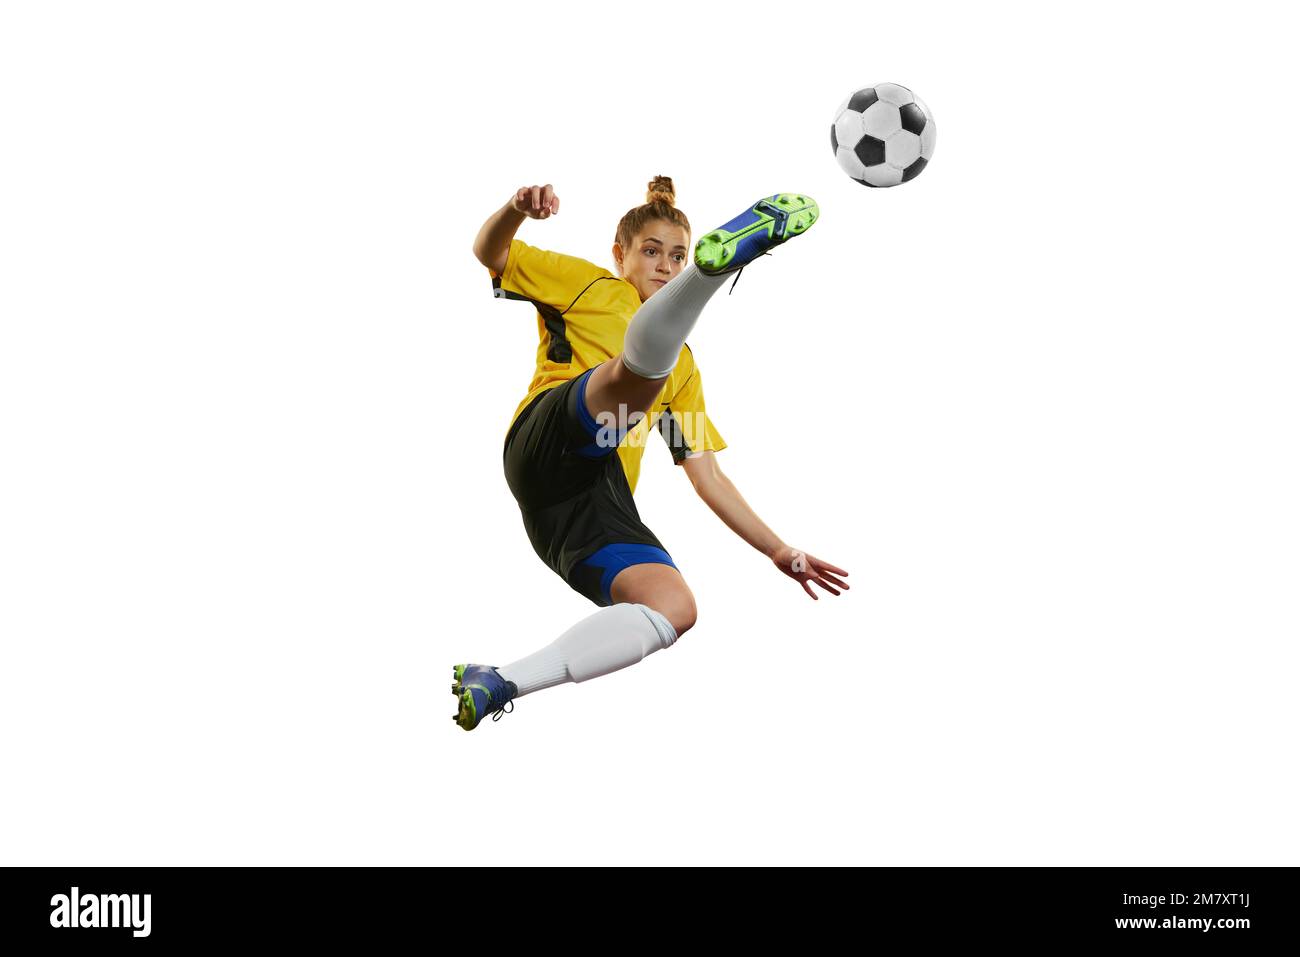 Hitting ball in a jump. Young professional female football, soccer player in motion, training, playing isolated over white background Stock Photo